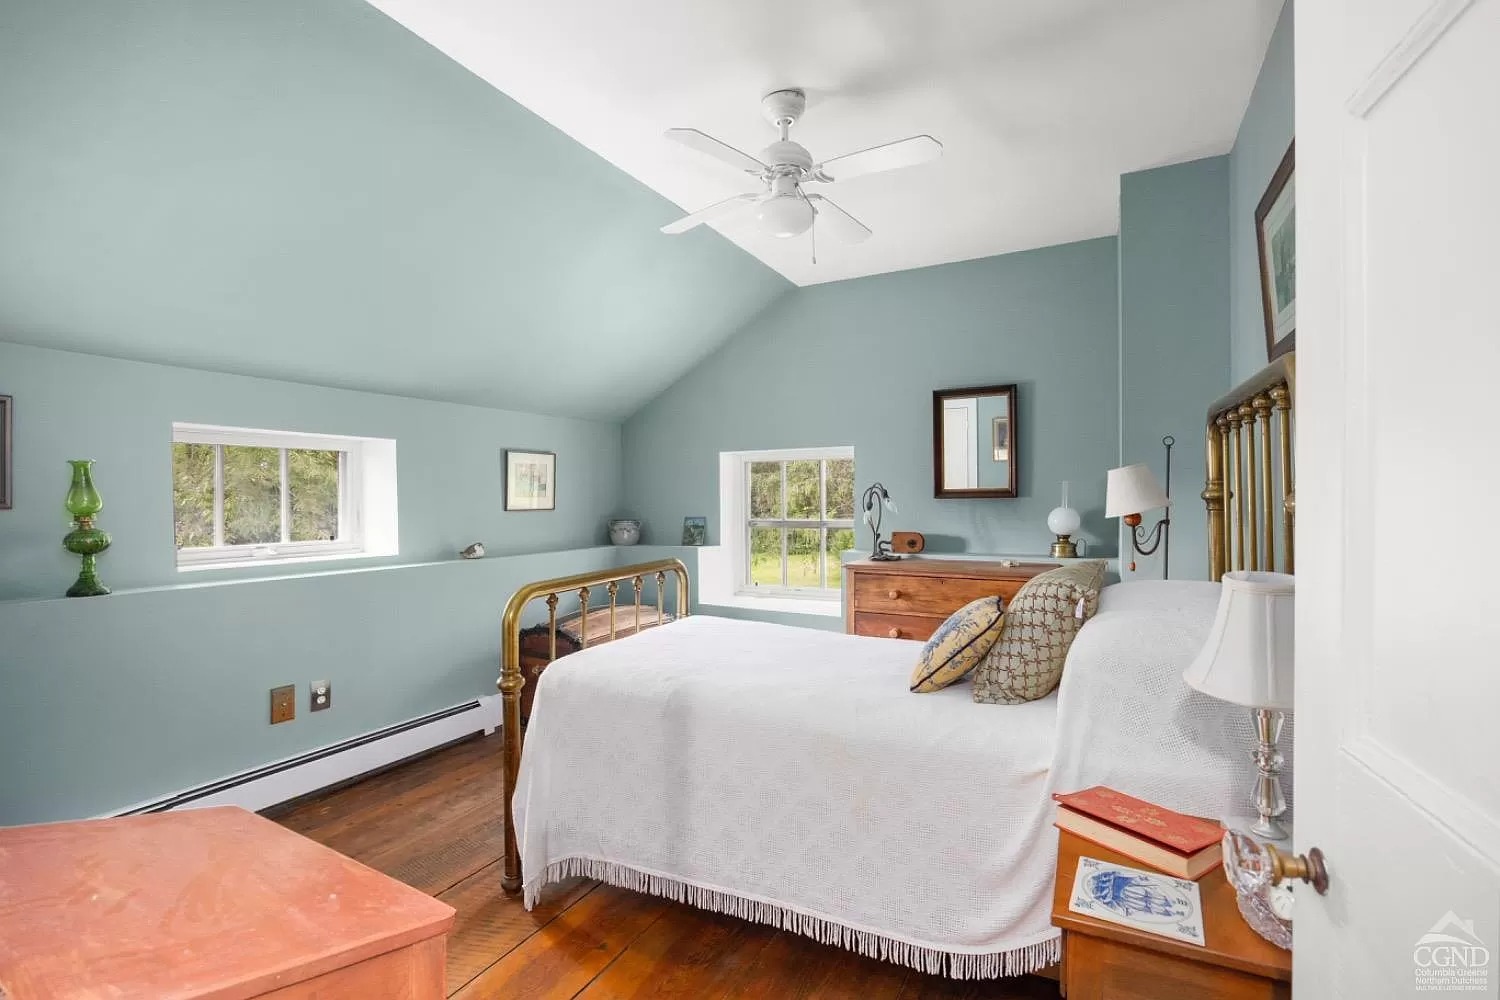 Another secondary bedroom in powder blue